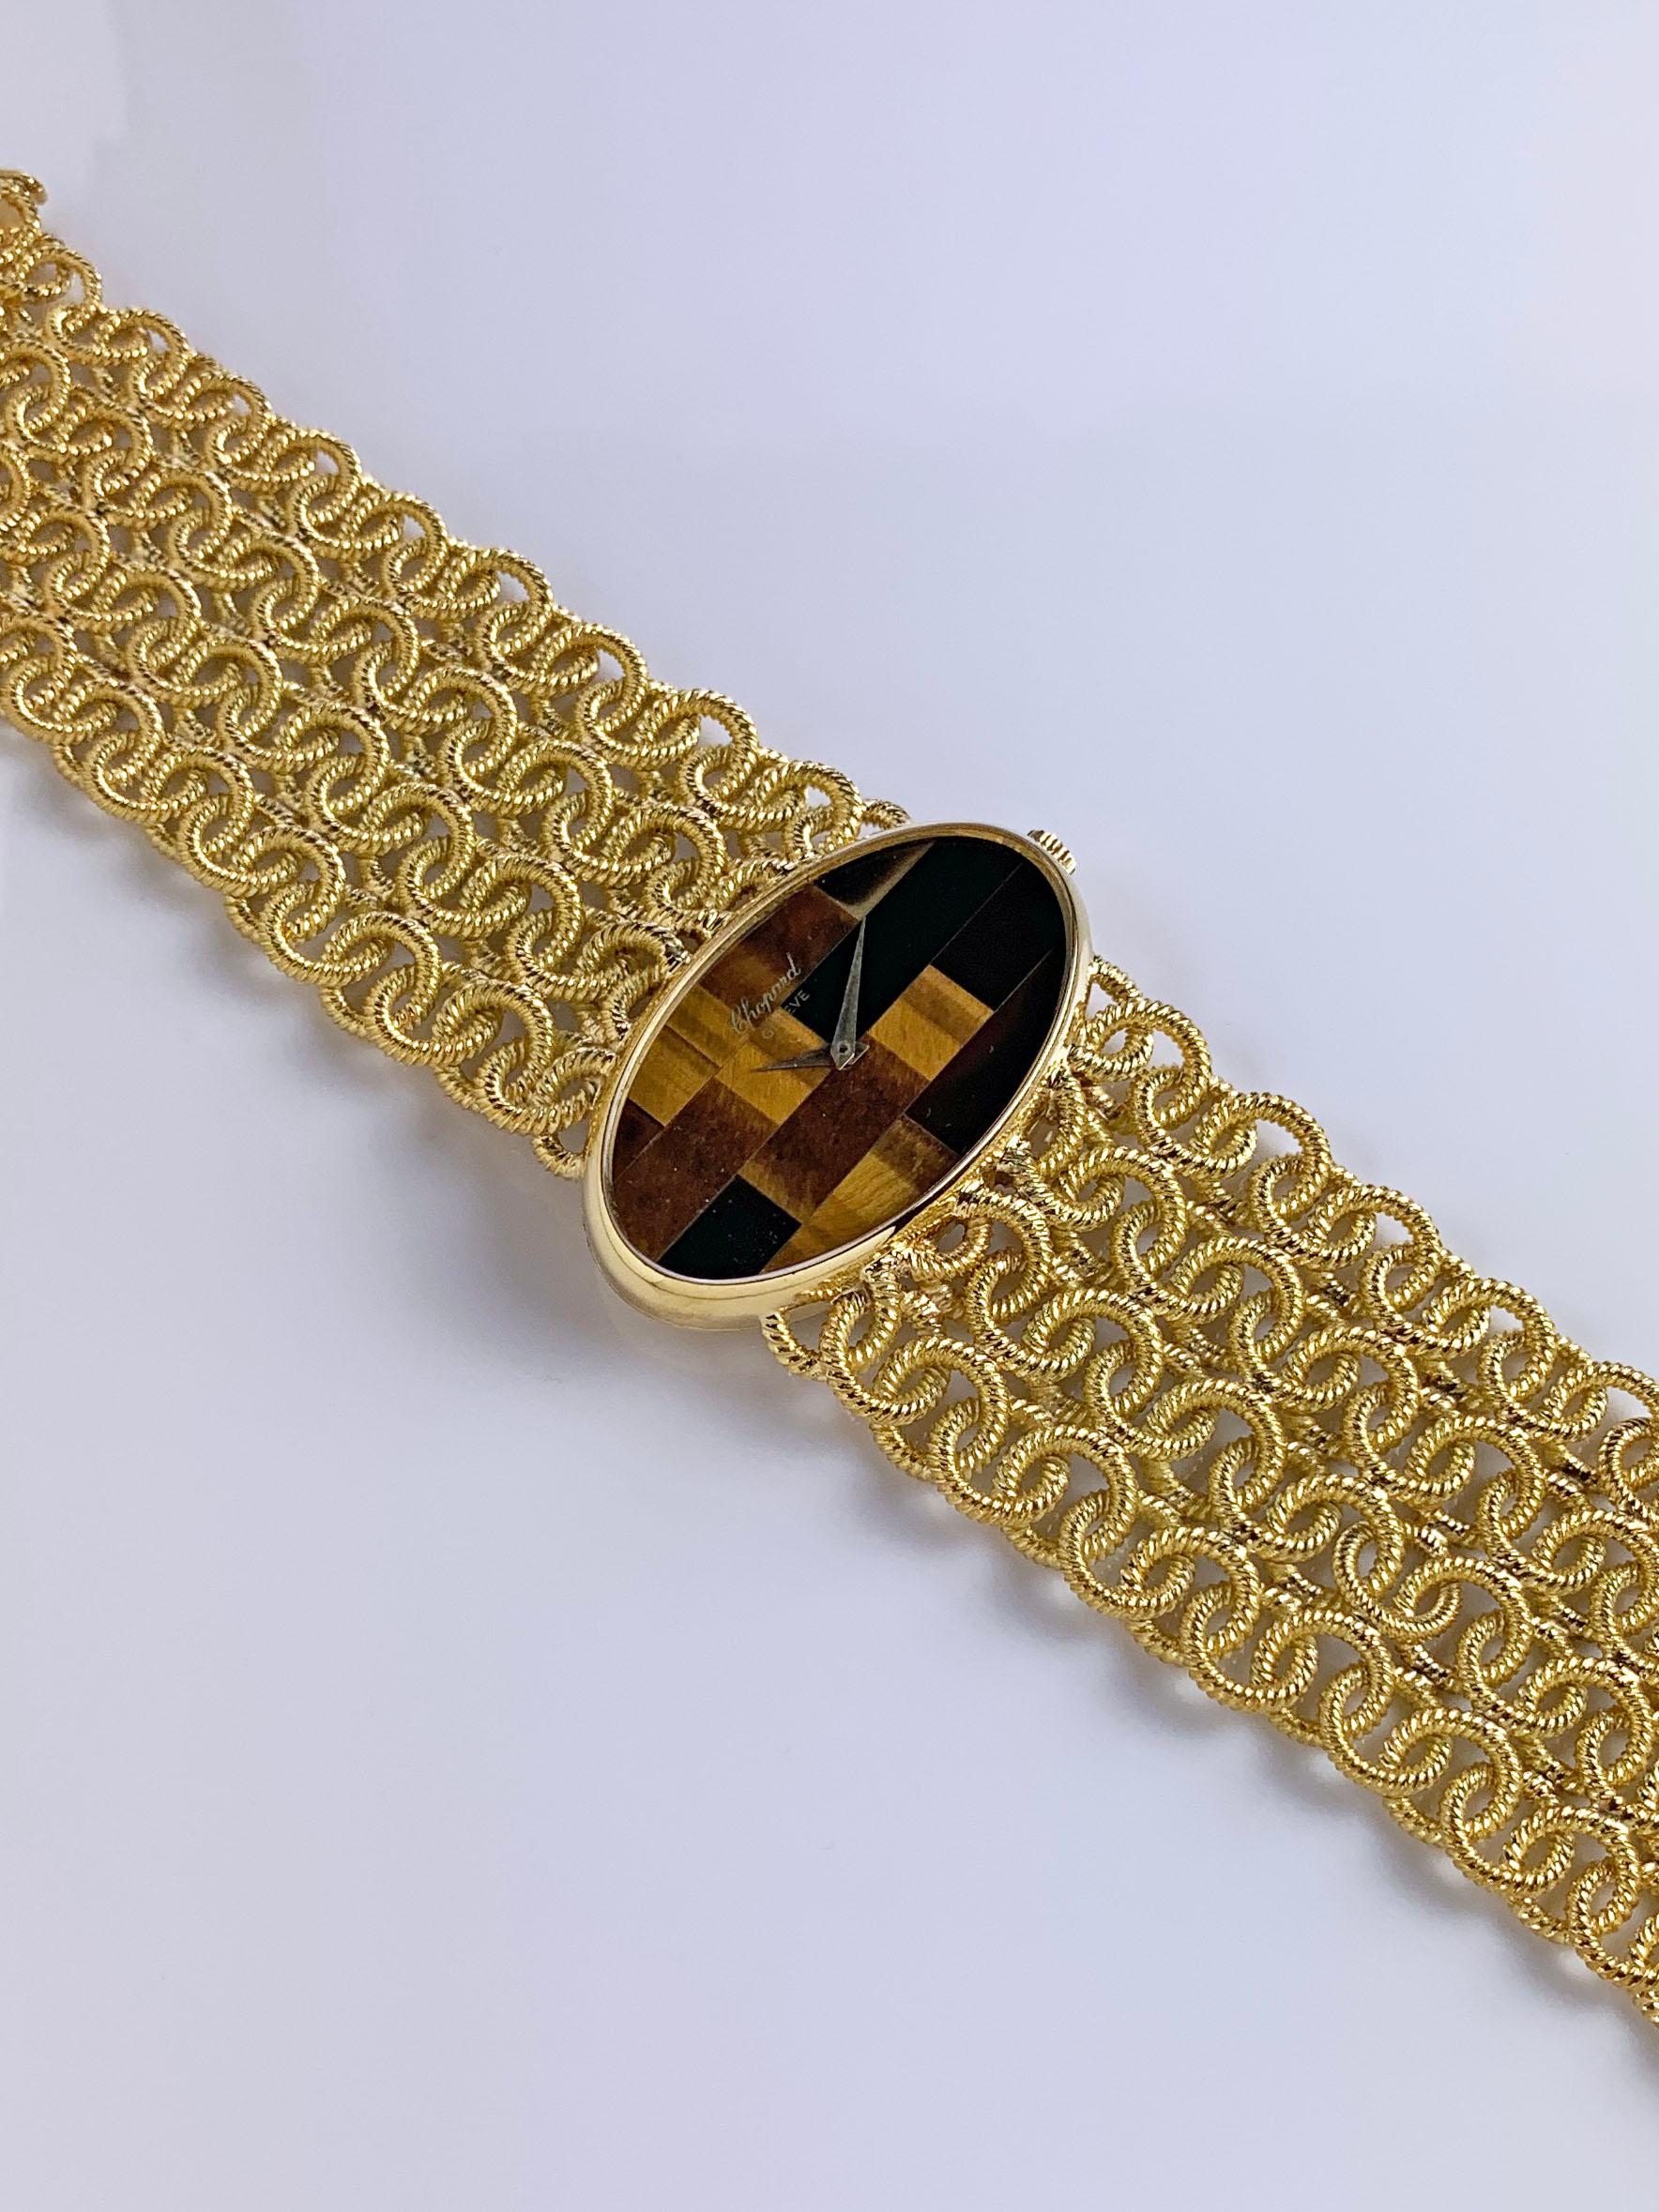 18K Yellow Gold Chopard Tiger's Eye Mosaic Dial Bracelet Watch
Stunning Chopard Tiger's Eye Mosaic Dial 
18K Yellow Gold Oval Case measures 38mm x 22mm
18K Yellow Gold Woven Bracelet with Four Rows and Graduated Size Tapering to Clasp.
Signed